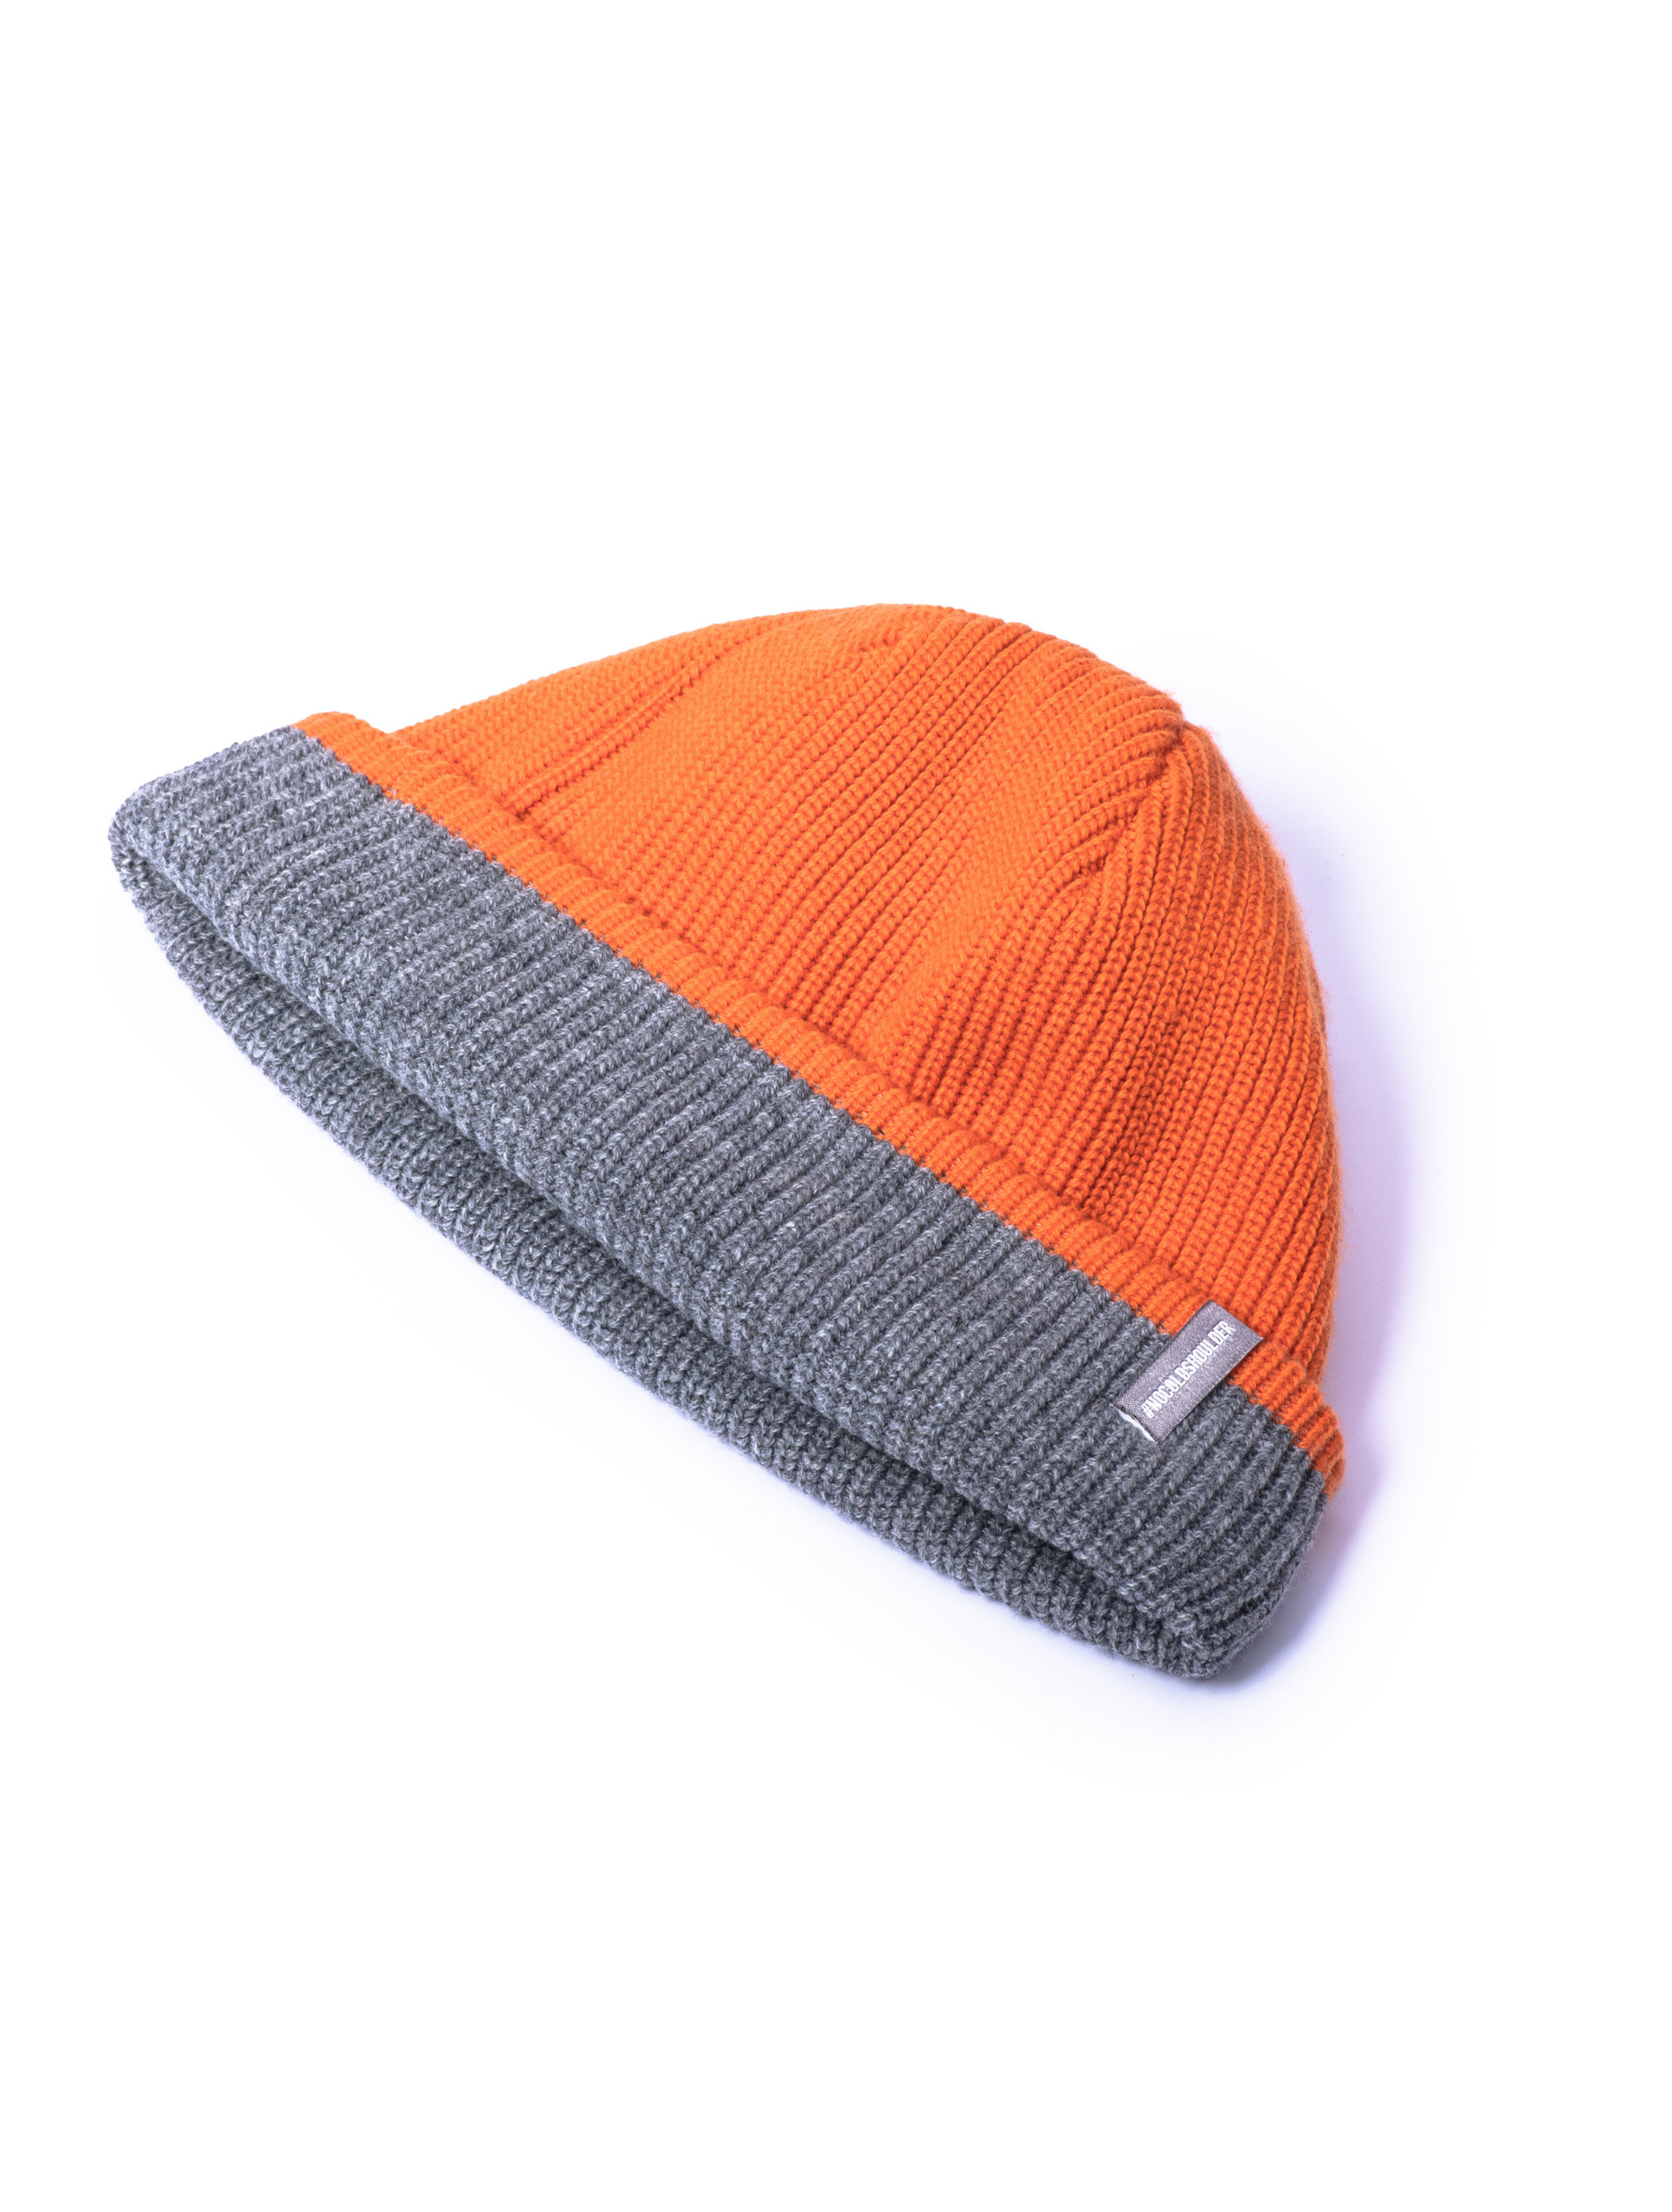 Knitted reversible beanie with orange side displayed.